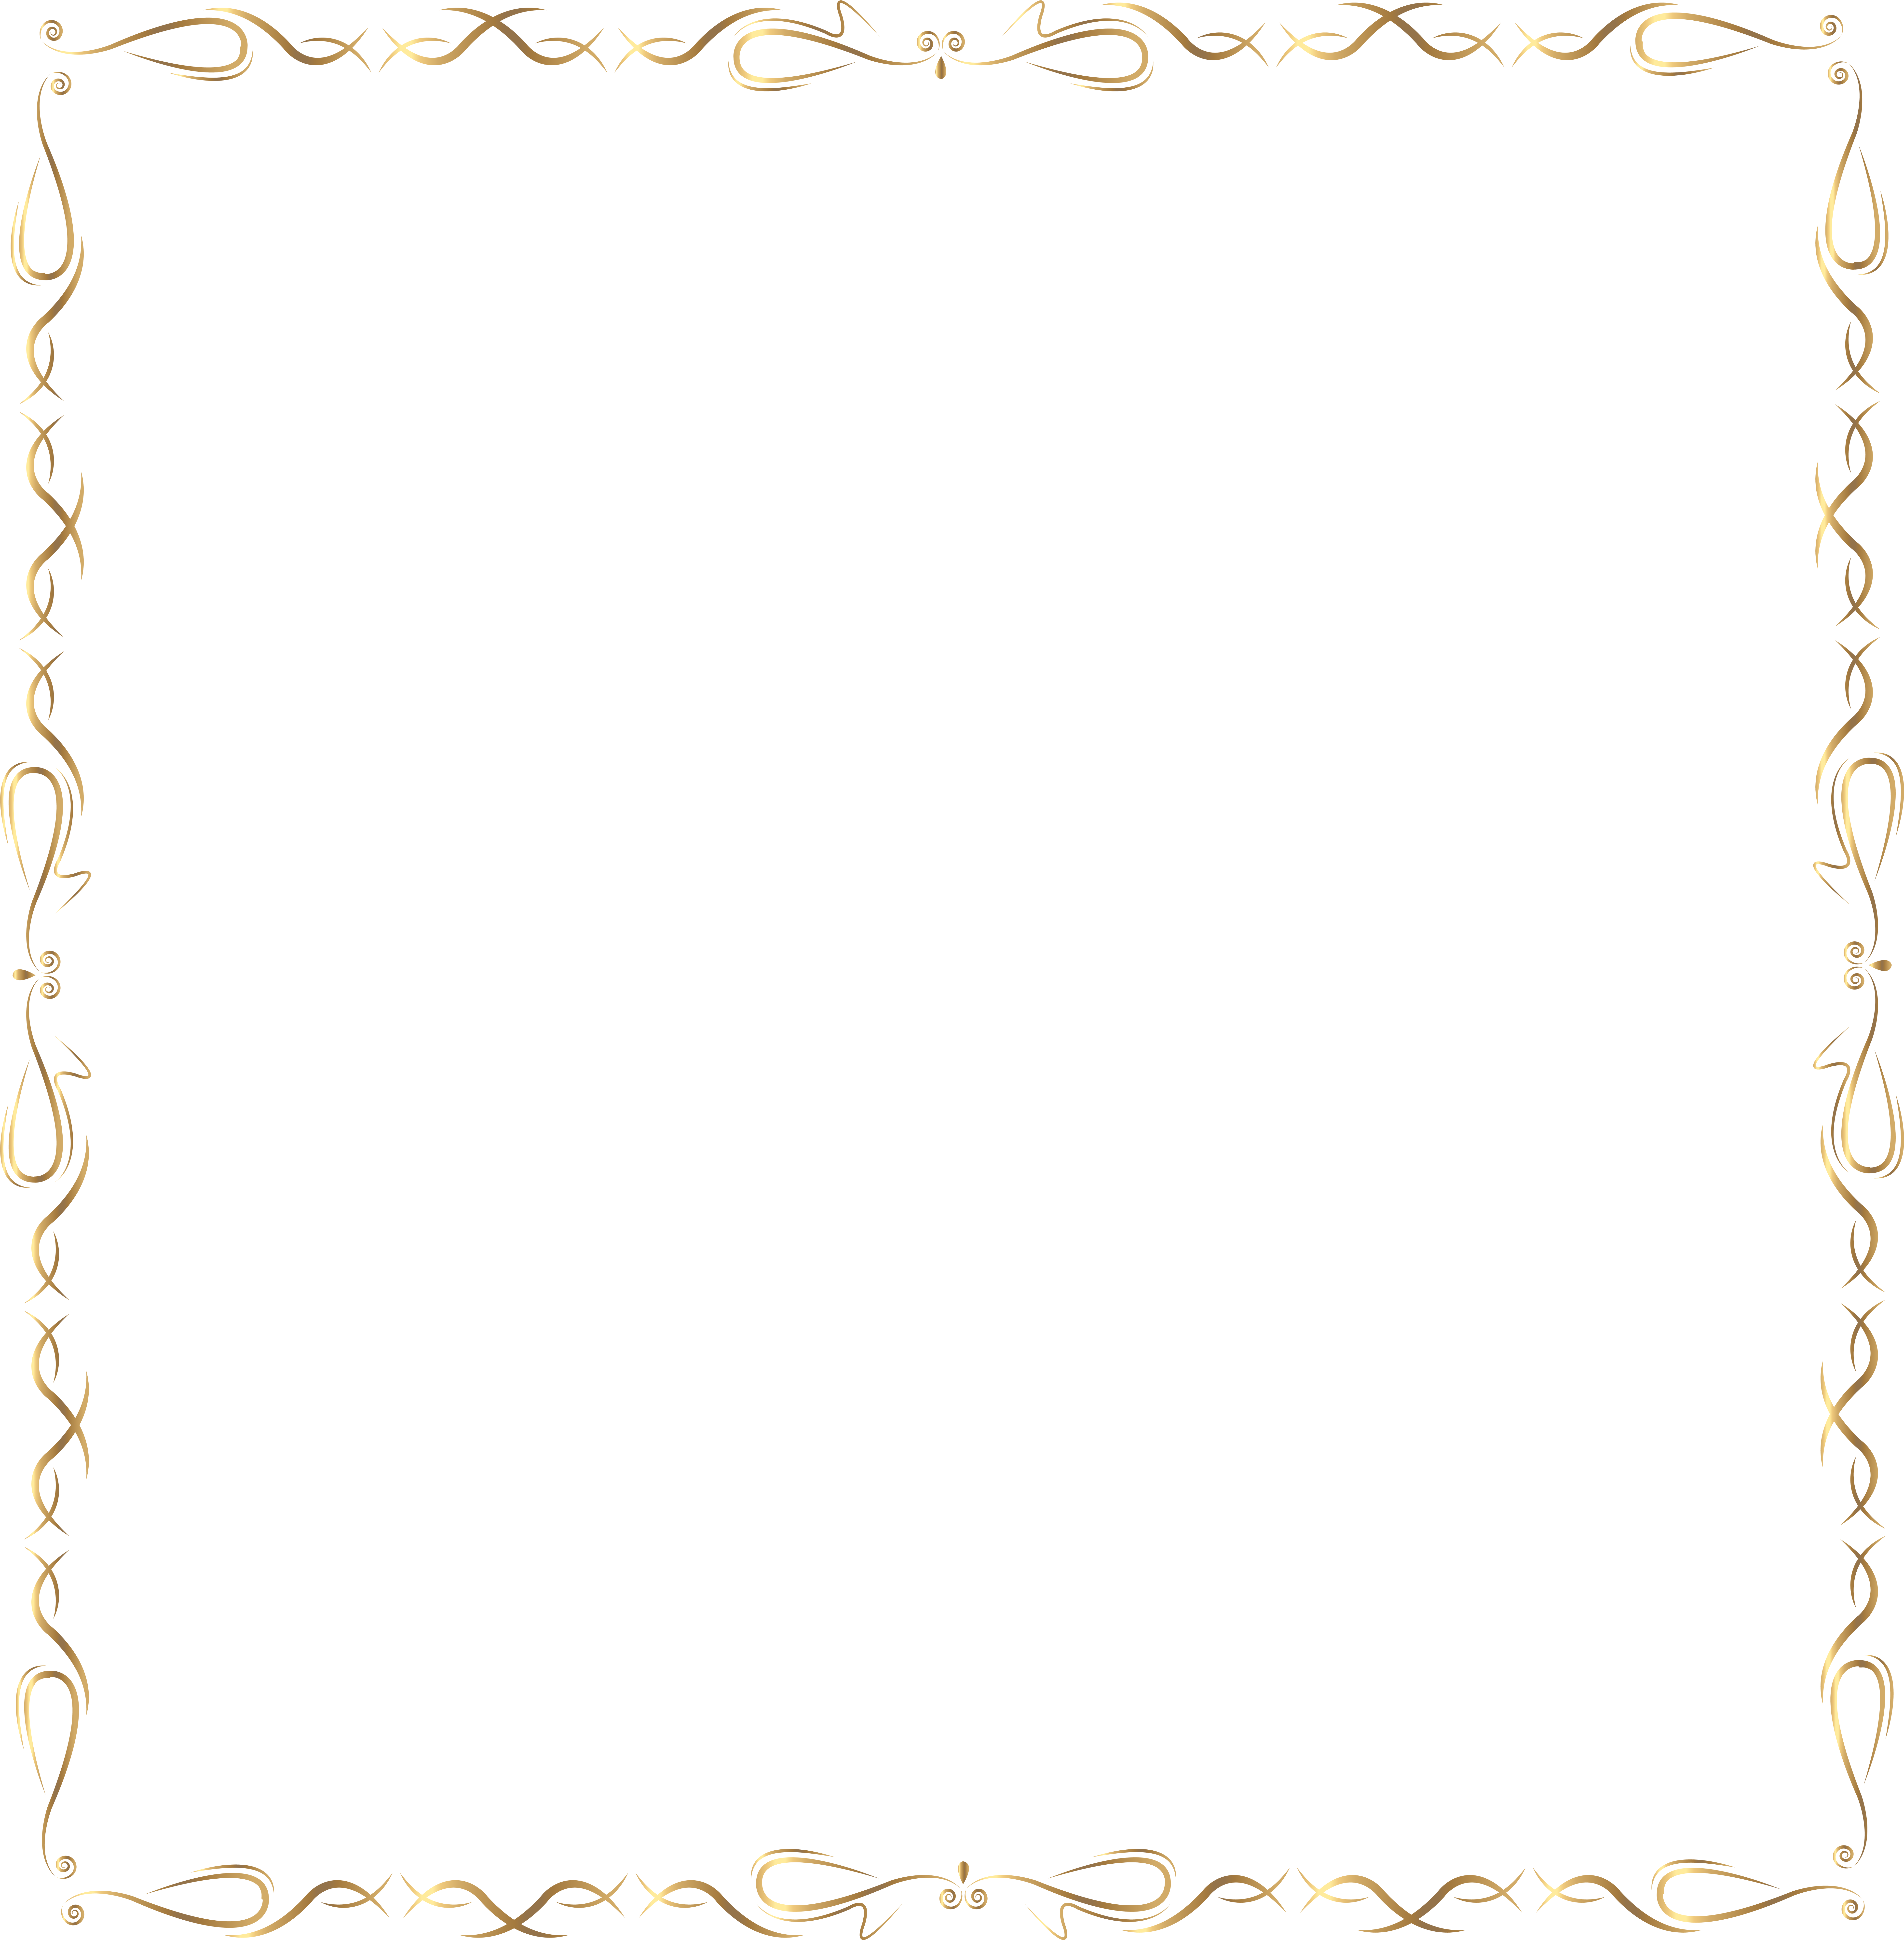 A Gold Frame With Black Background